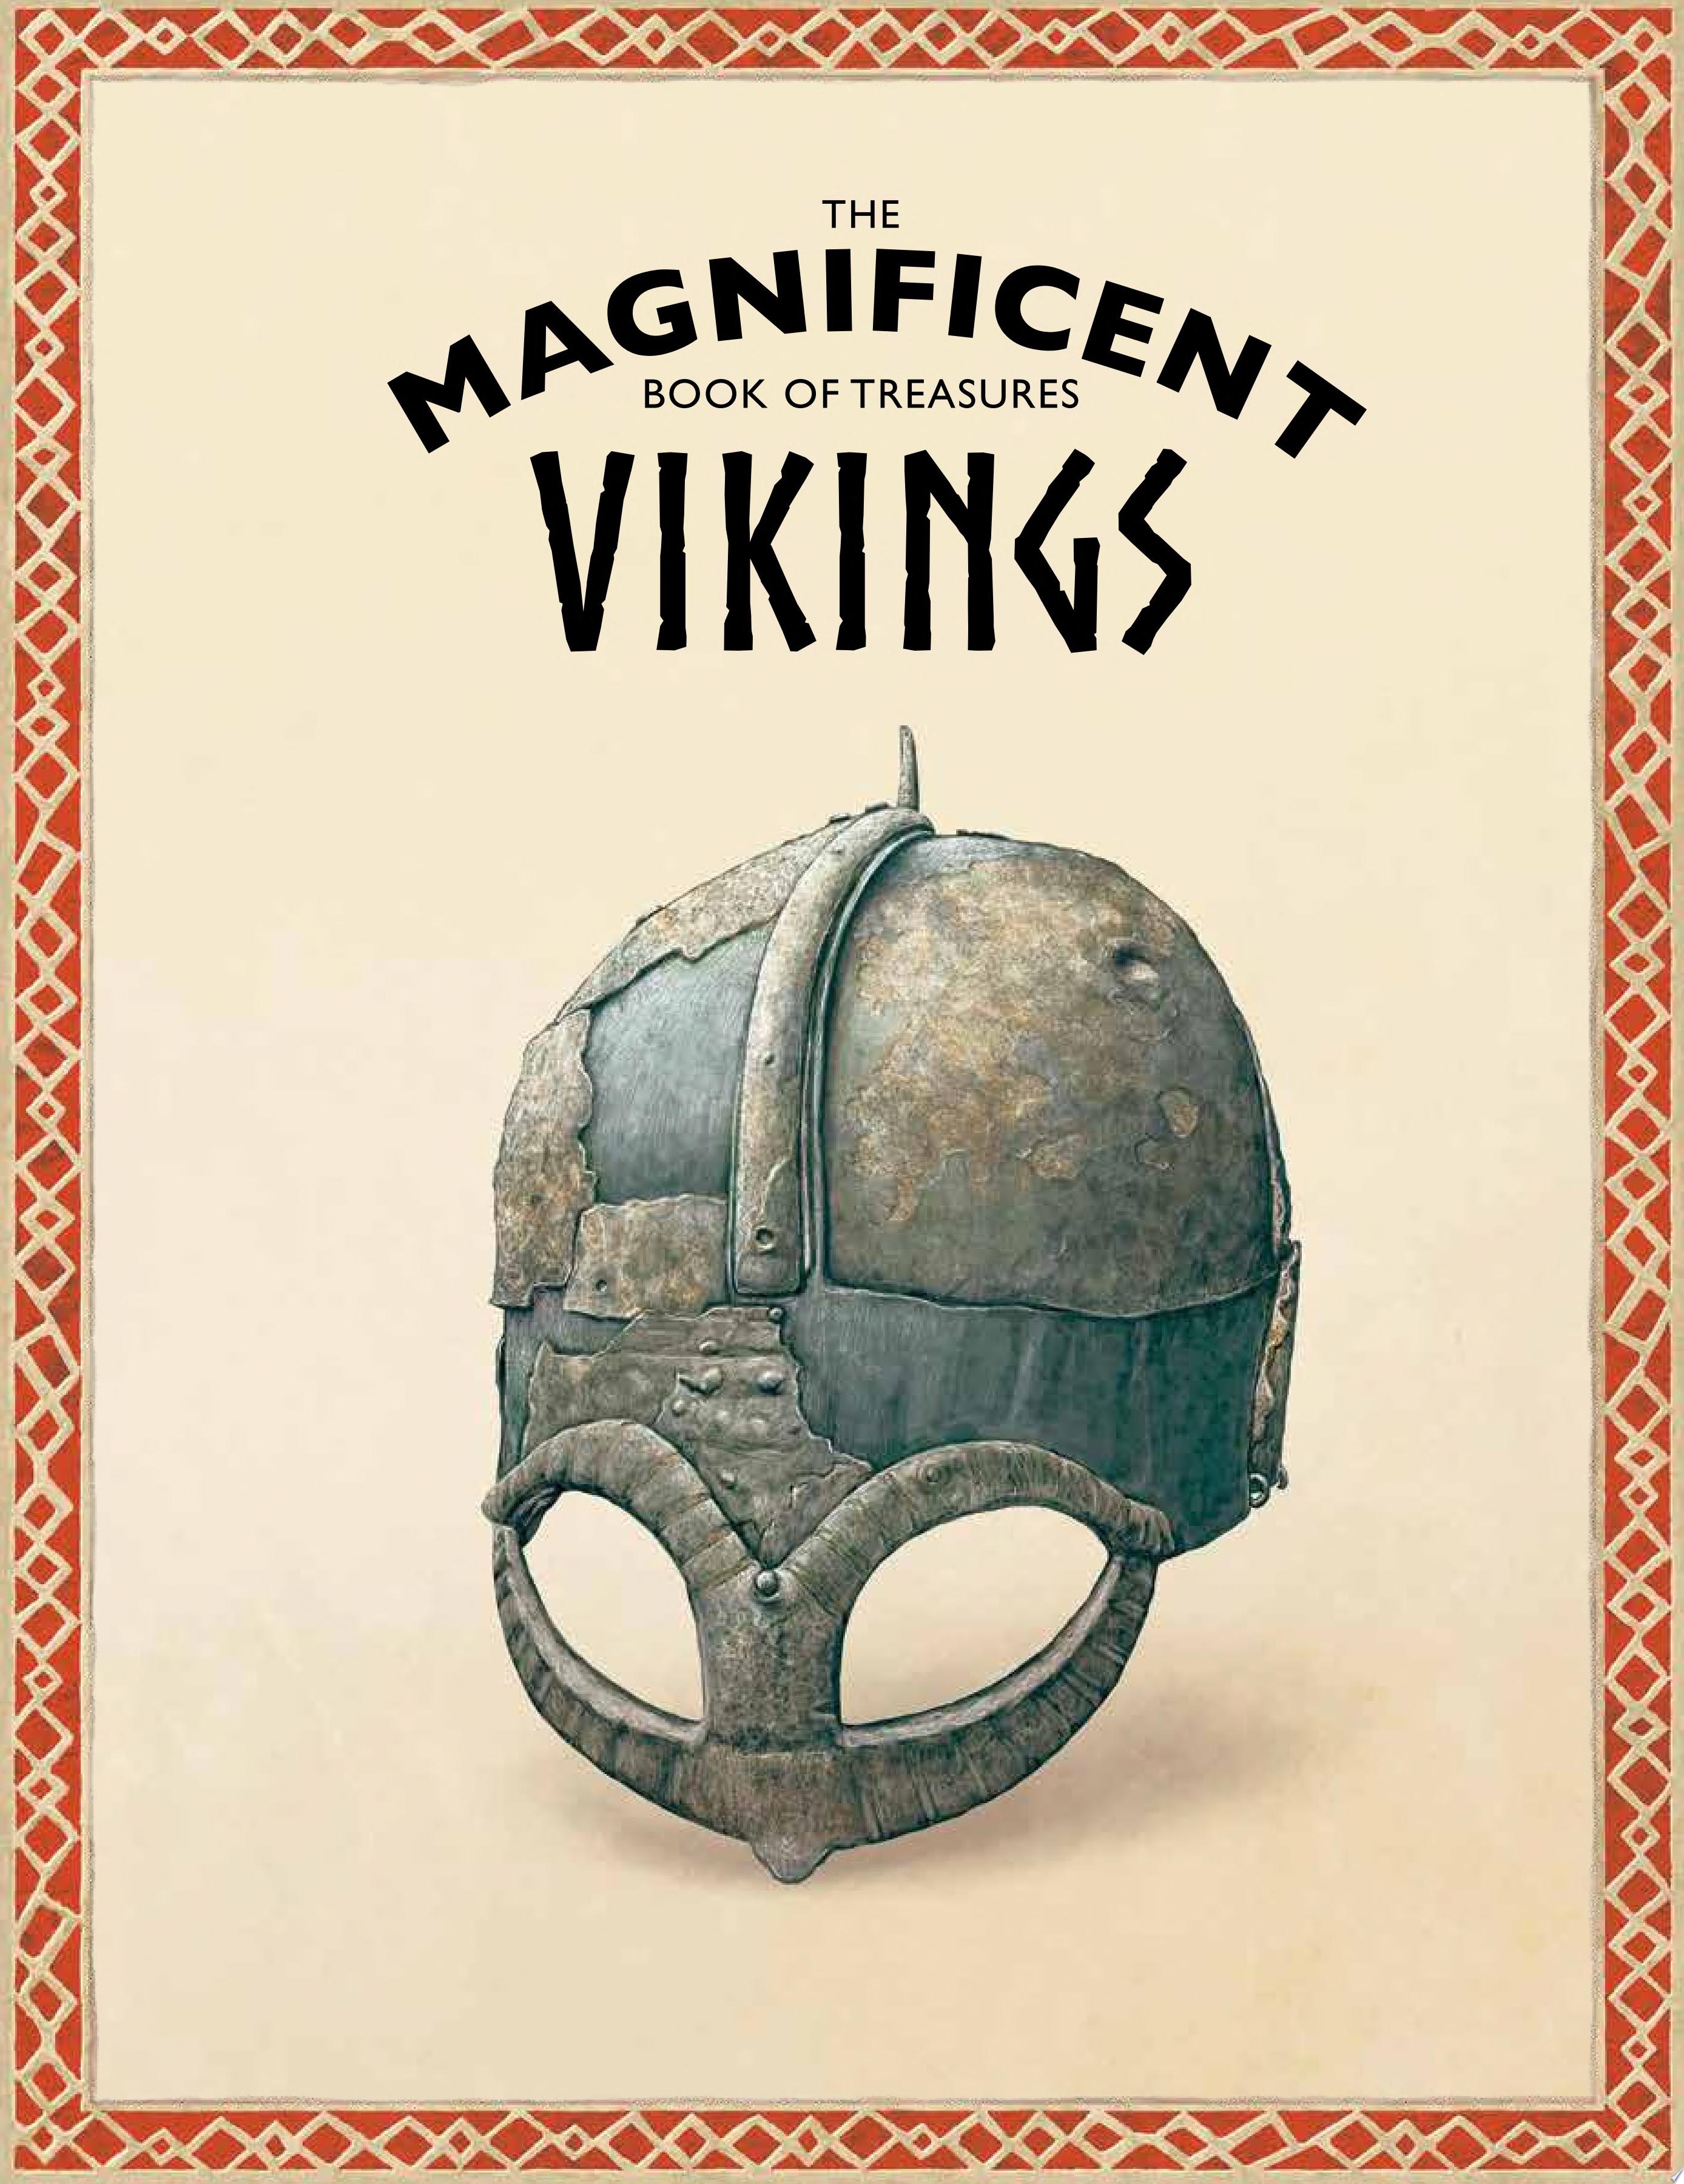 Image for "The Magnificent Book of Treasures: Vikings"